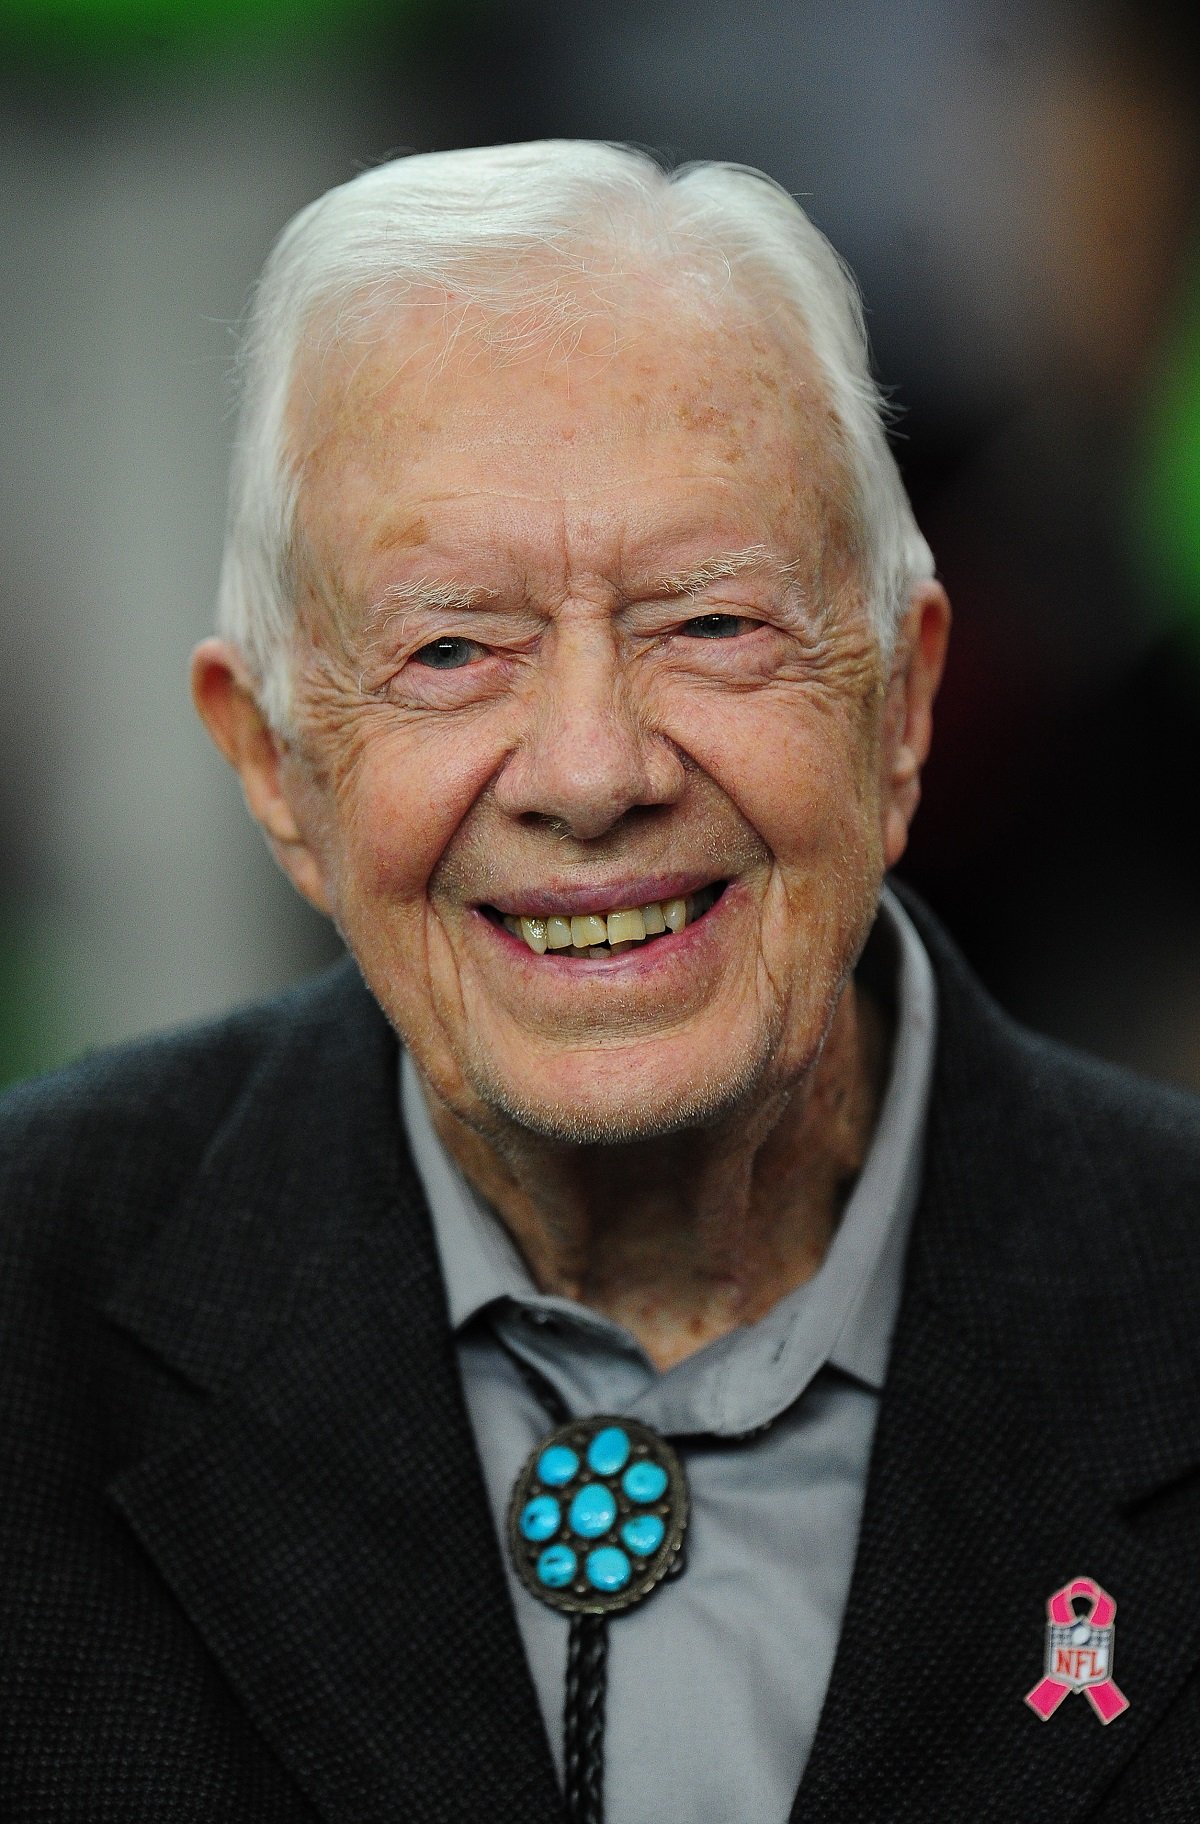 Jimmy Carter smiling at a football game in 2016